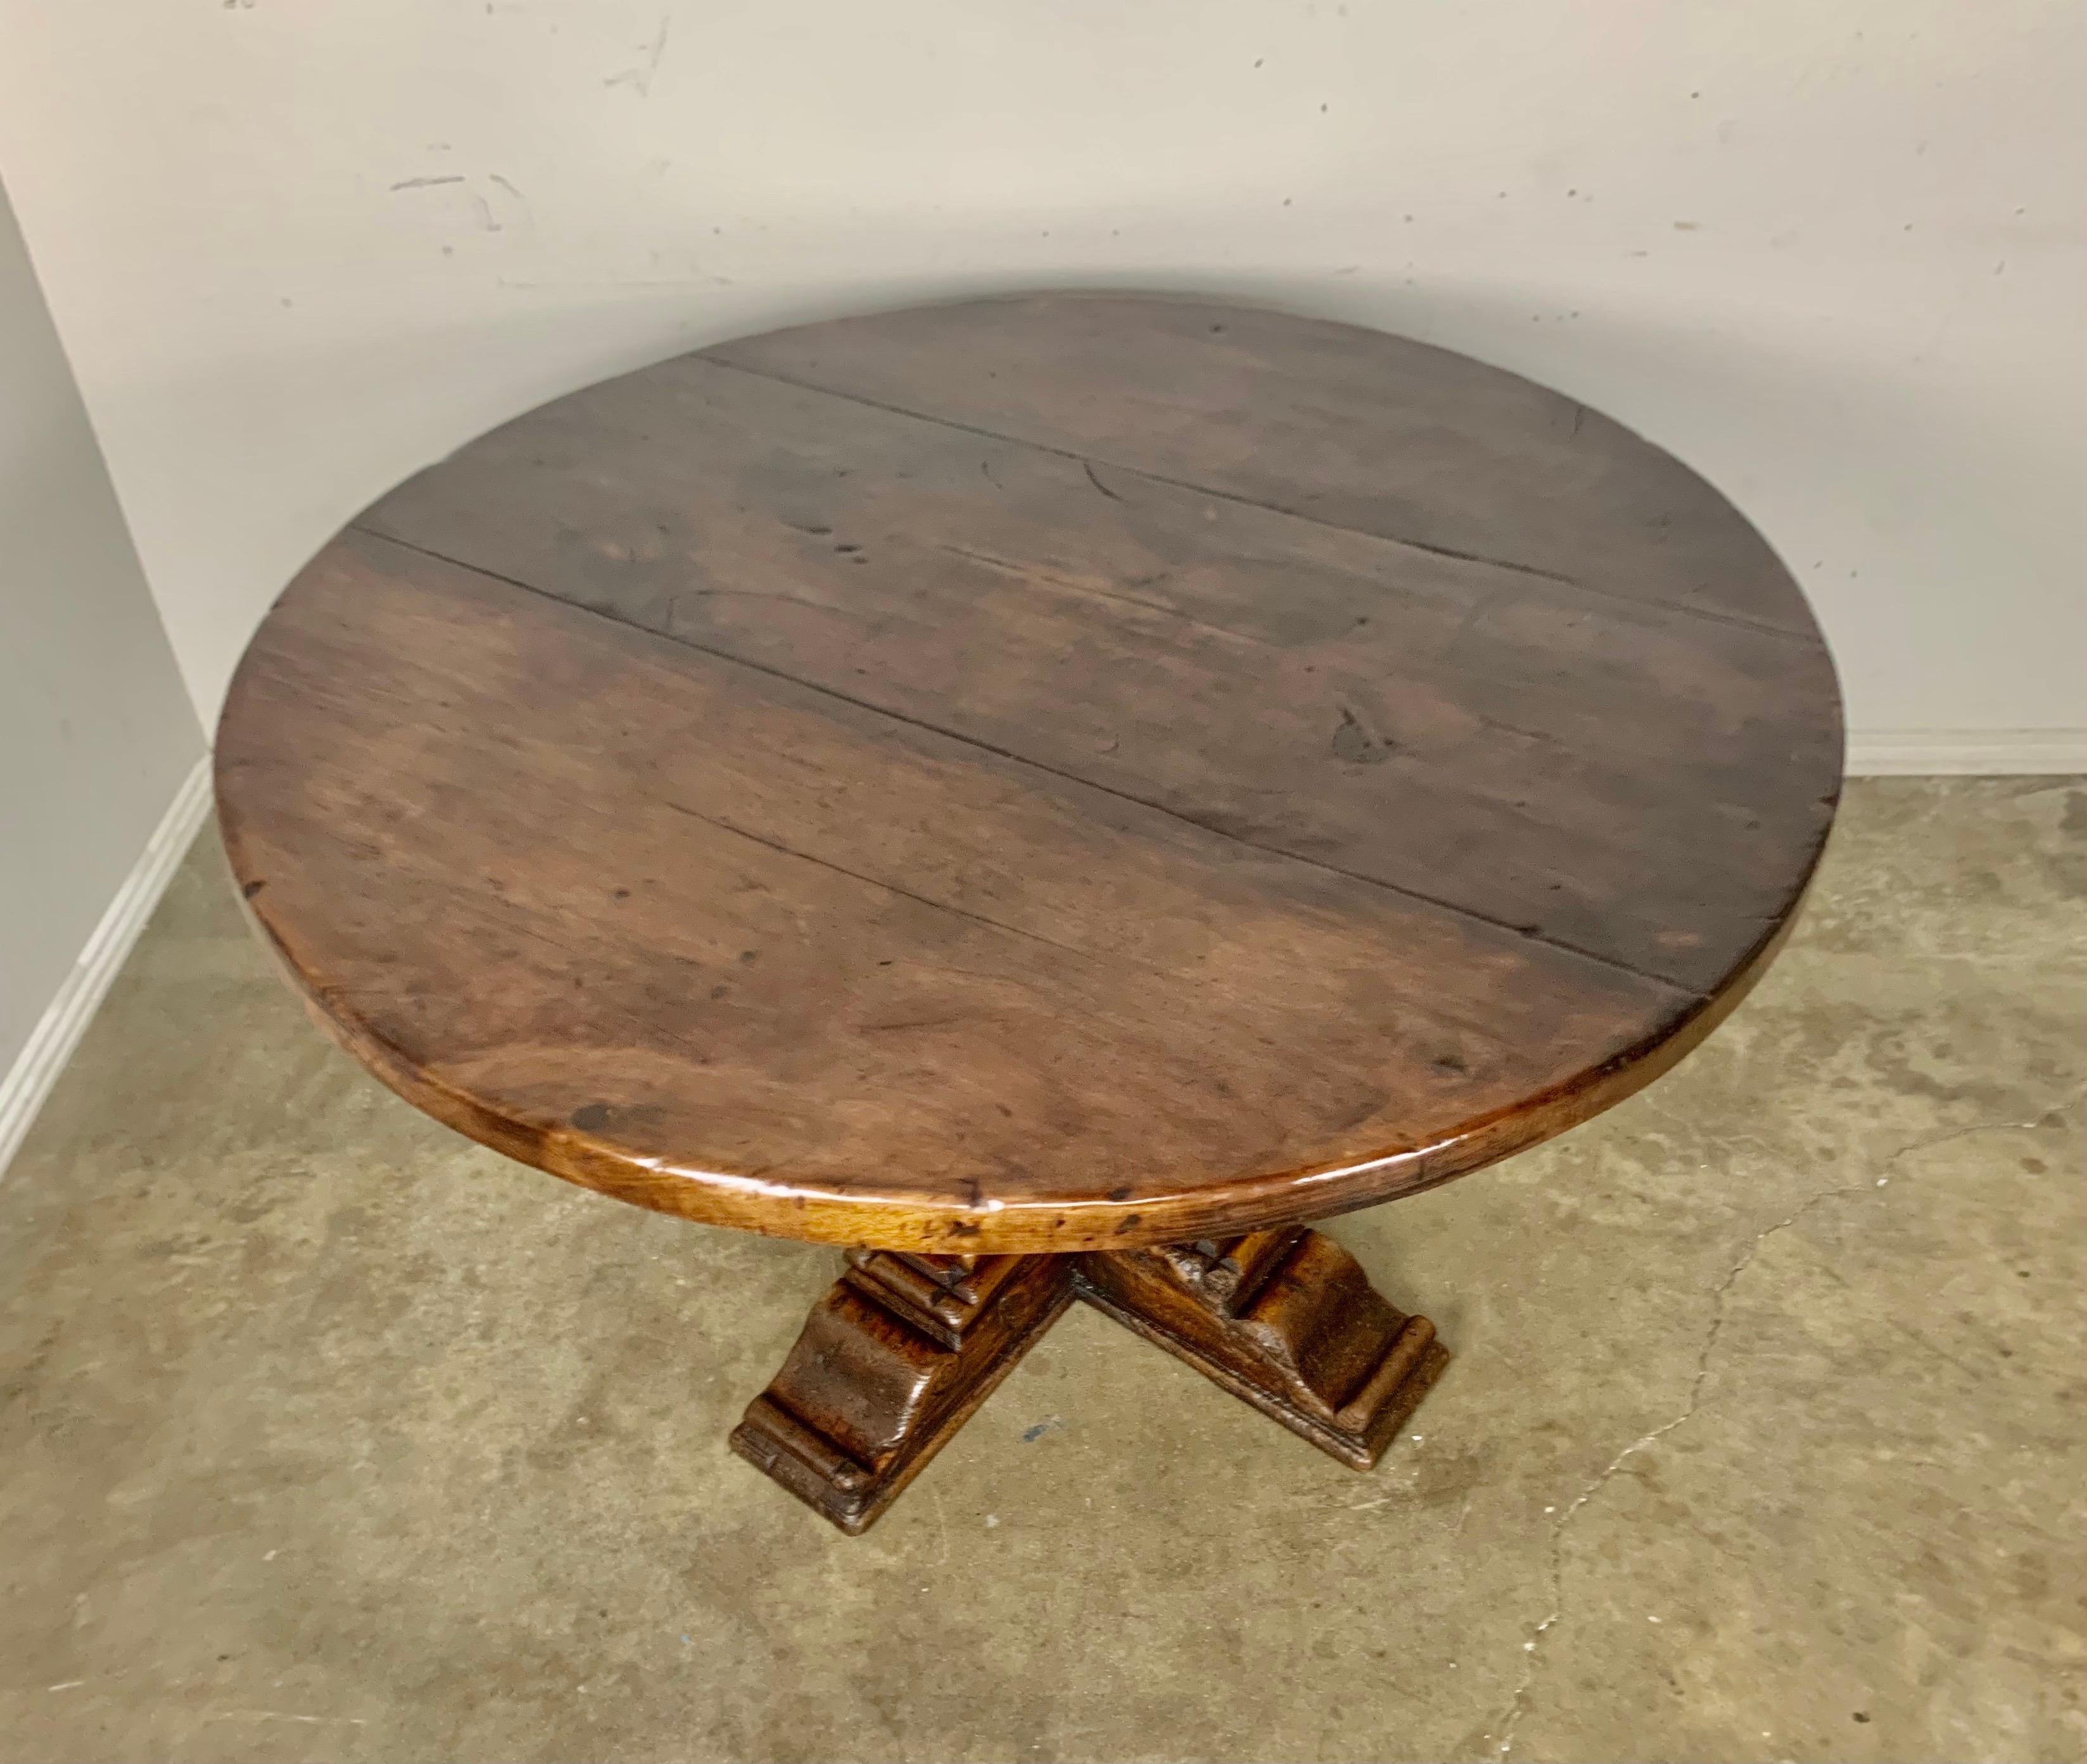 19th C. Walnut Italian round shaped pedestal dining table. The solid round top sits on a pedestal made up of four columns resting on a solid base. The patina is beautiful and the simple shape lends itself to many styles of decor.